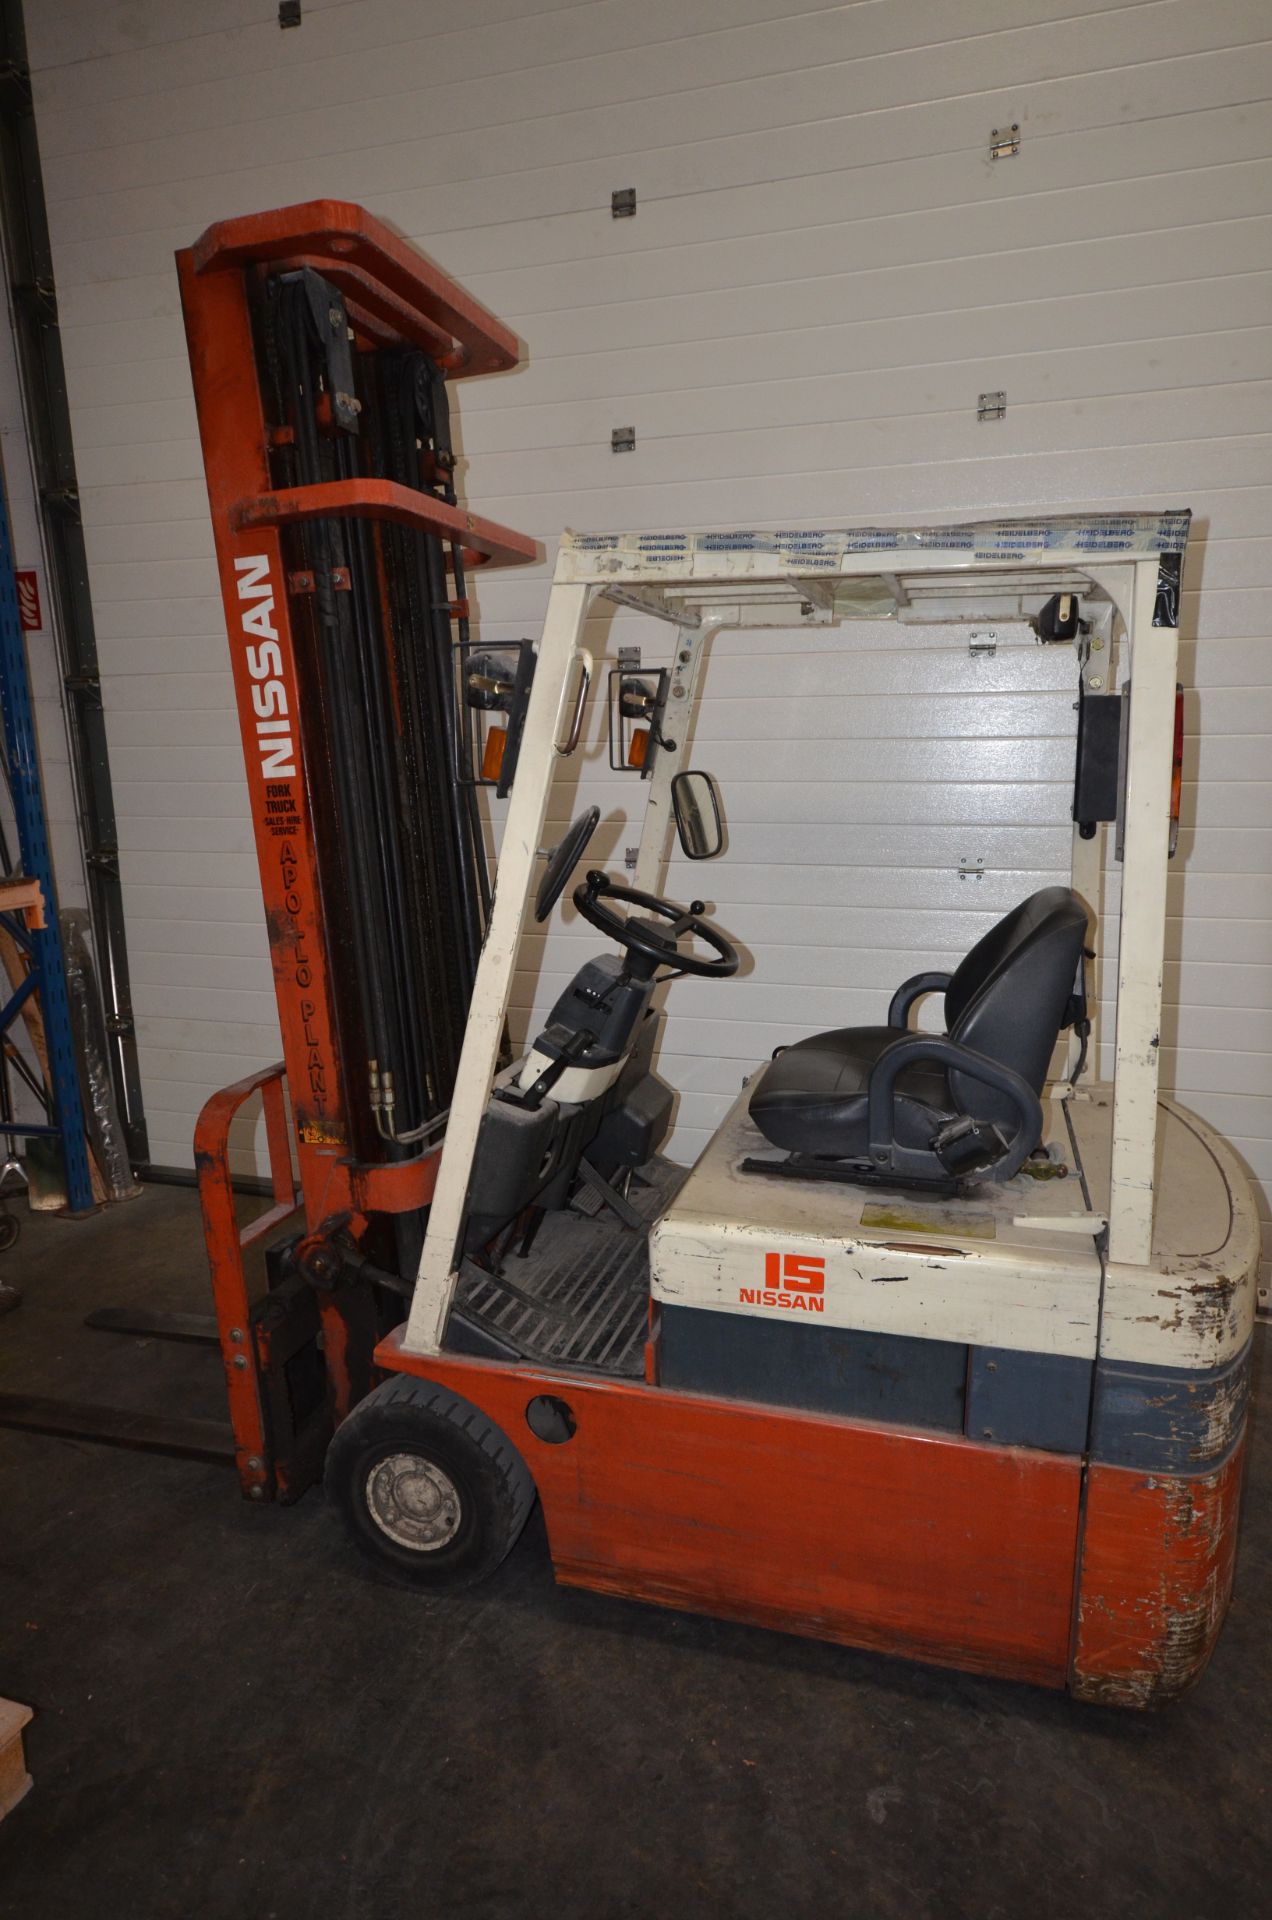 Nissan 15 NOIL 15C 1500kg Counterbalance Fork Lift Truck serial no 785042 with side shift & charger